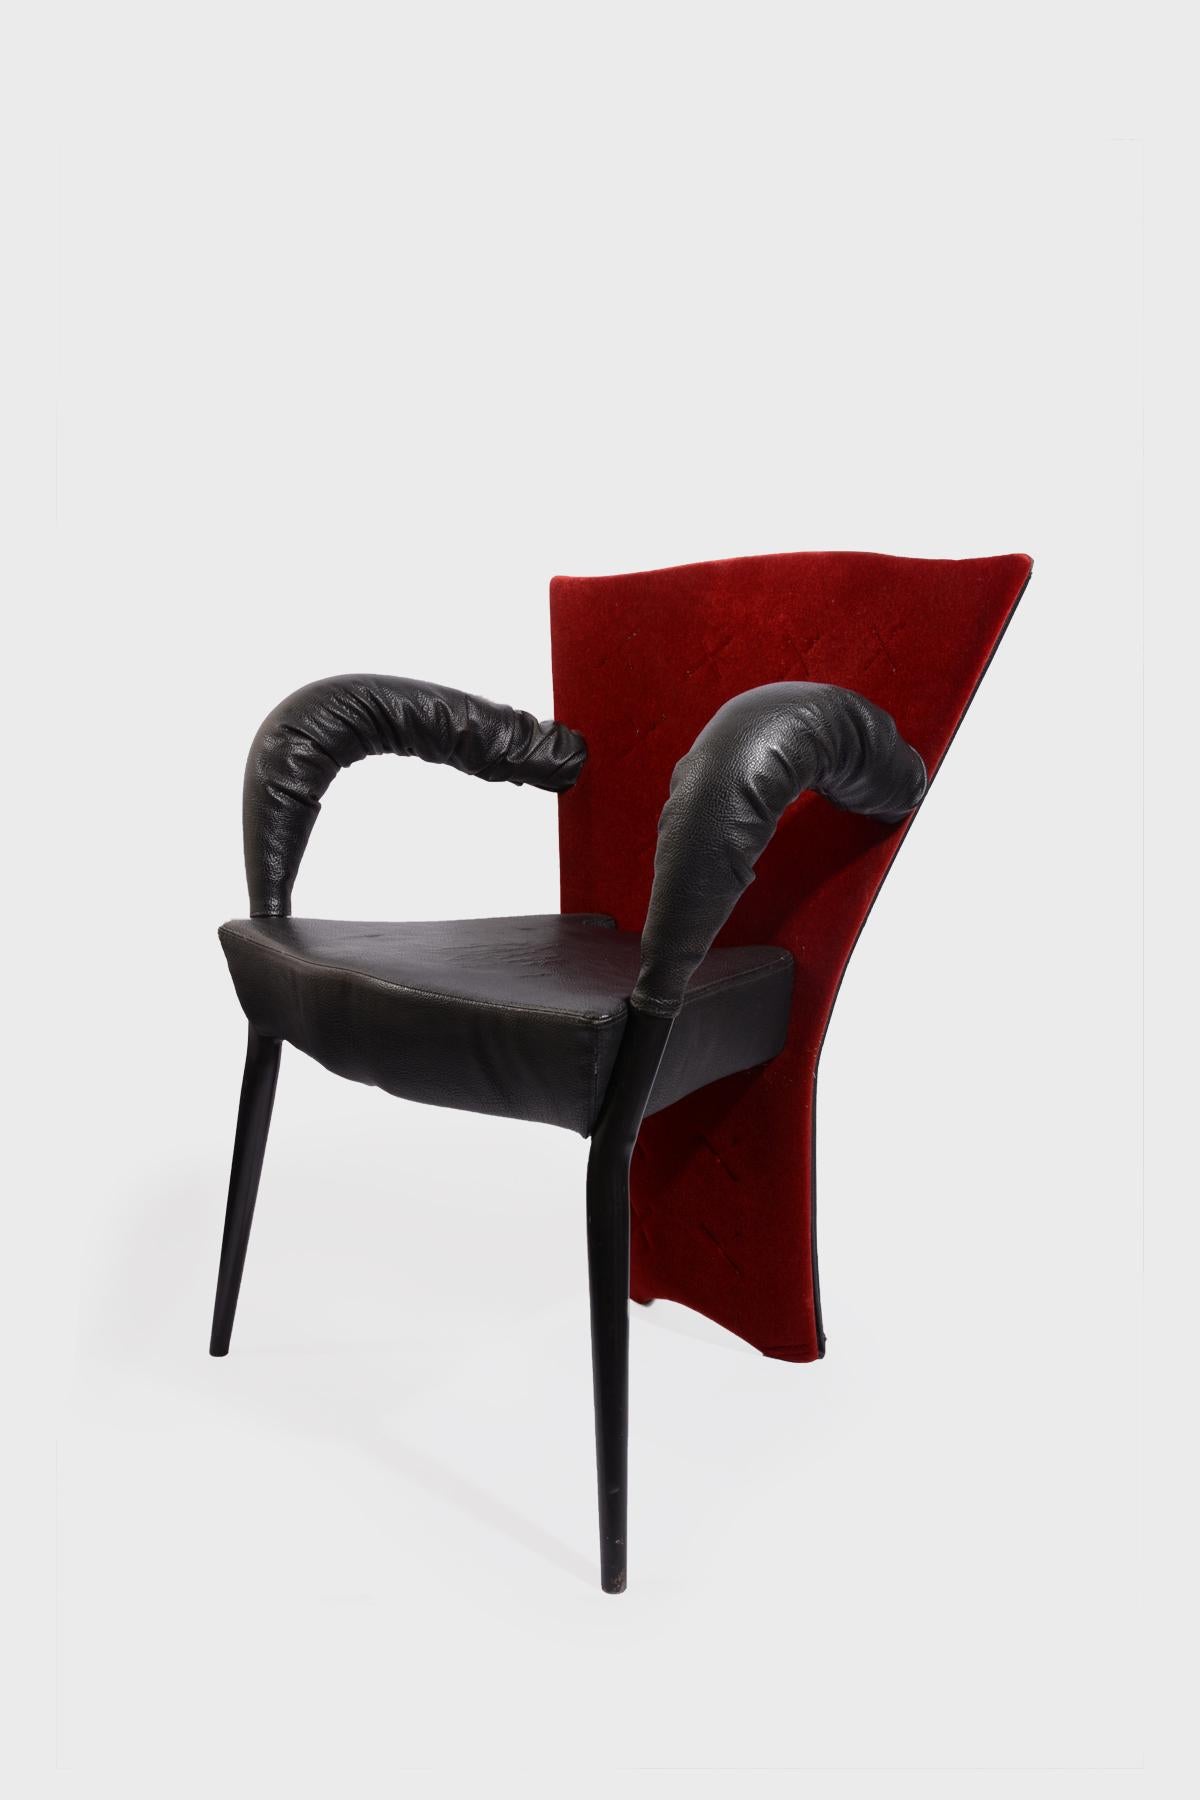 This rare and unique chair by Borek Sipek for Scarabas was designed in the style of Borek Sipek with leather ruffled arms and a velvet Back.

The life of Borek Šípek is a typical story about big world self-made men. He is often compared to a male